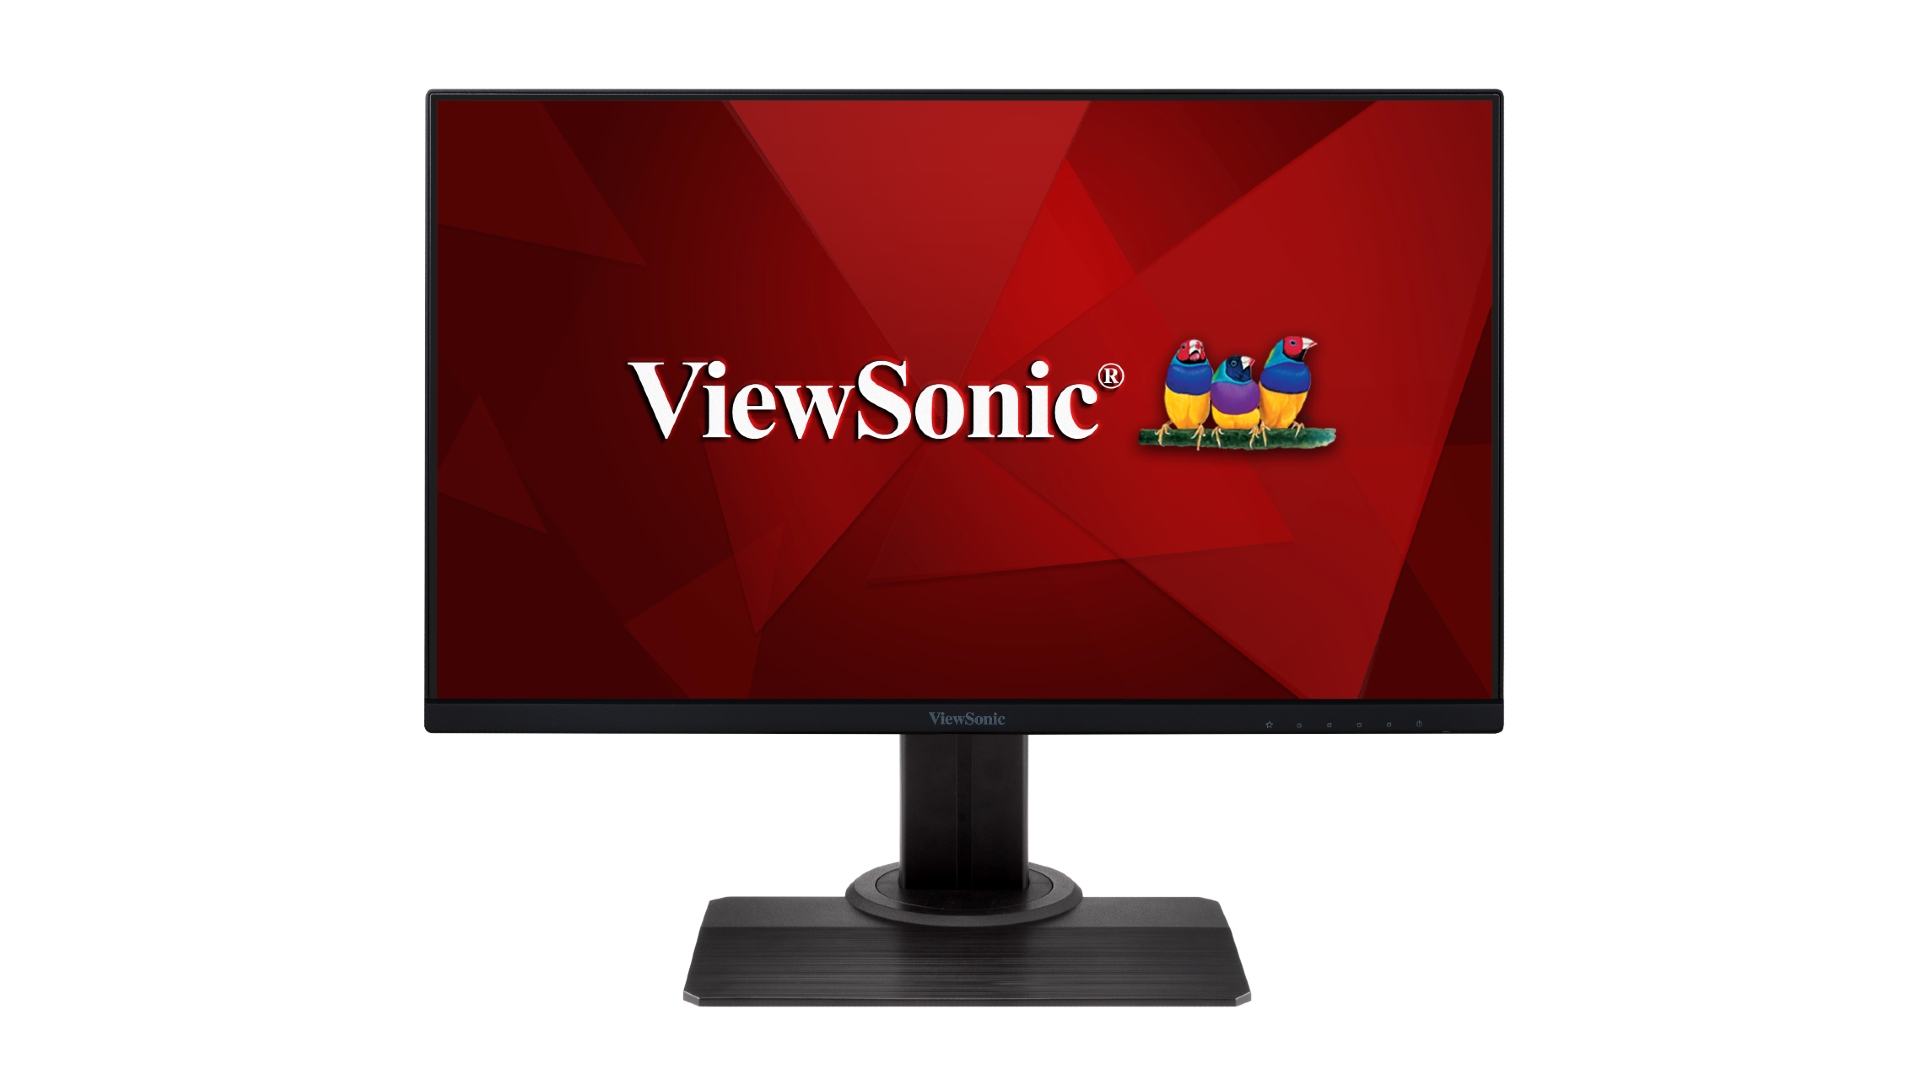 ViewSonic XG2431 gaming monitor launched in India